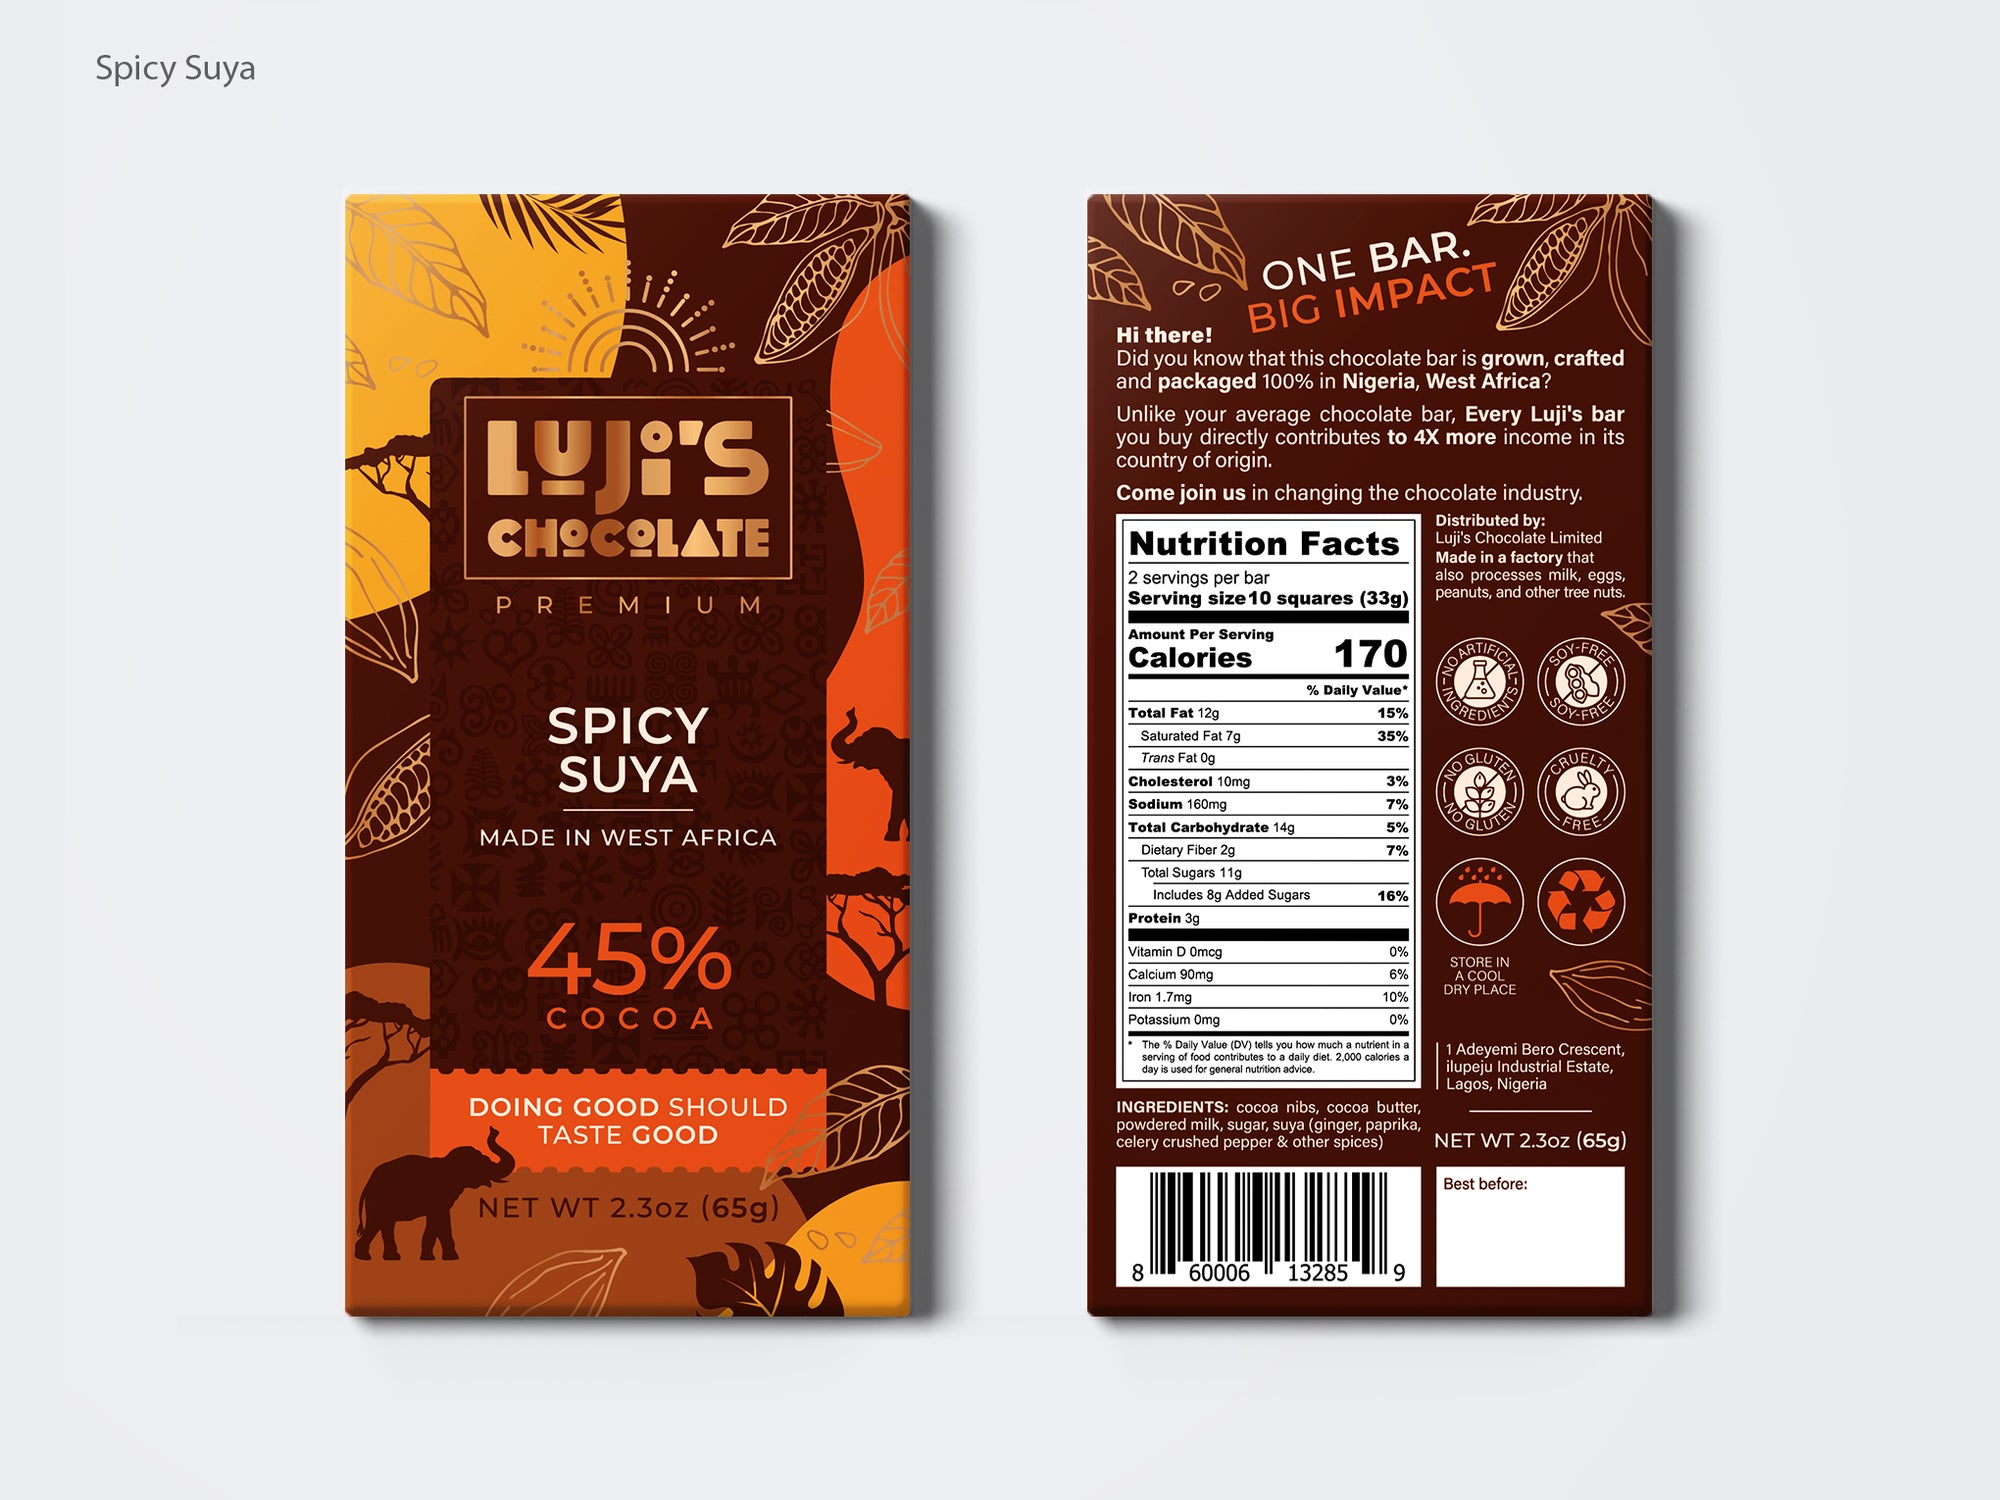 A dual-view of Luji's Chocolate Spicy Suya flavor, featuring a front design with an elephant silhouette against a brown and orange backdrop that states '45% Cocoa' and 'Made in West Africa,' plus the slogan 'Doing Good Should Taste Good.' The reverse side details of the chocolate's Nigerian origin, ingredients list, nutritional facts, and the company's commitment to increasing local farmers' income.